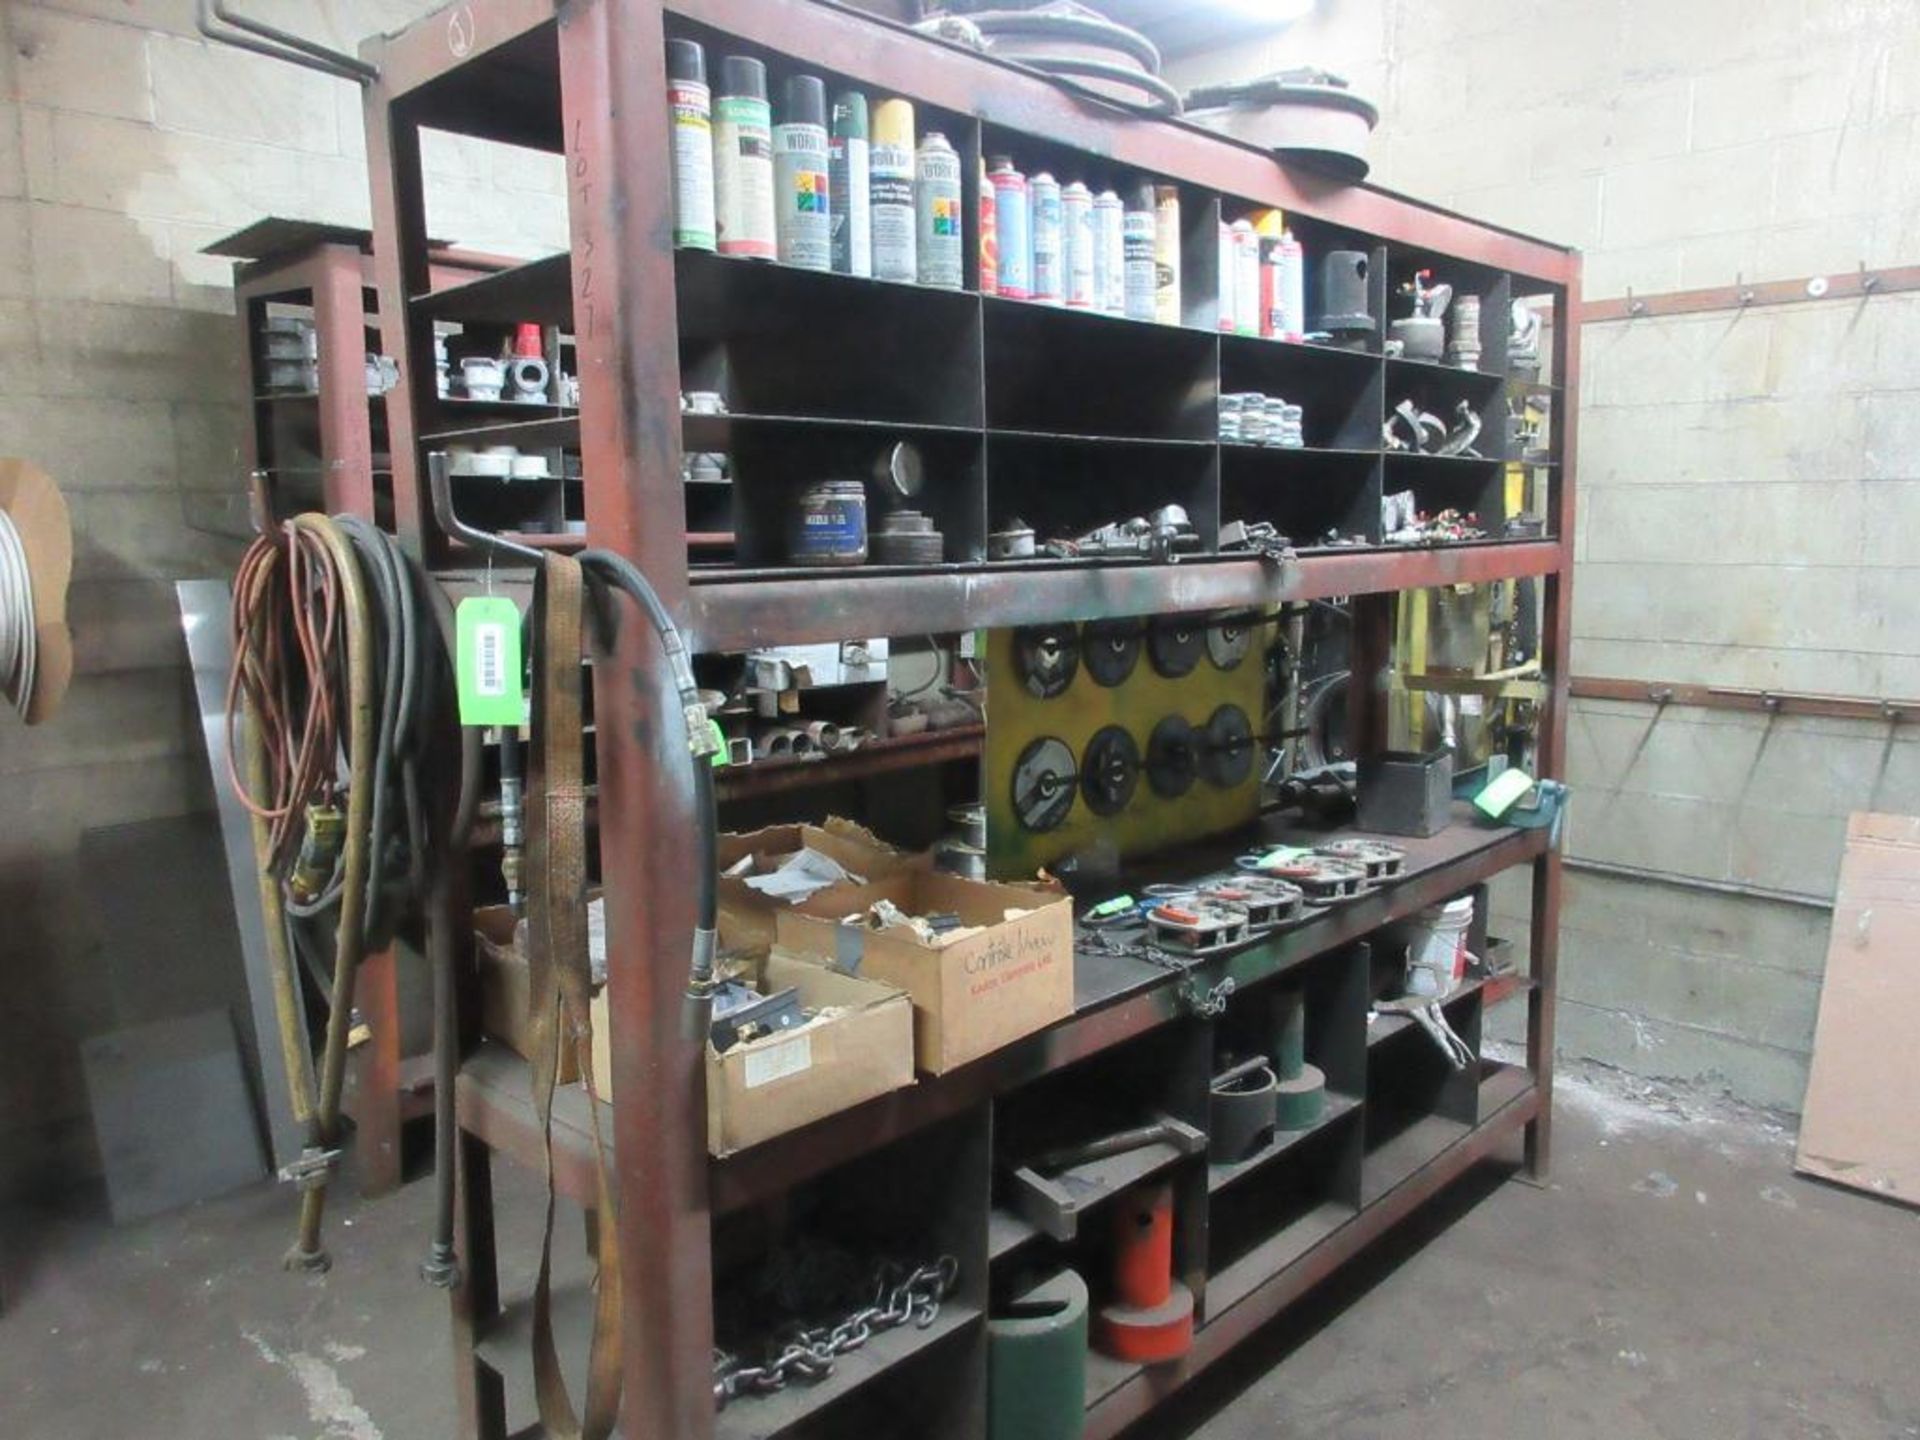 CONTENTS OF WEST TOOL ROOM EXCLUDING 6 LOTTED ITEMS (124, 125, 127, 127, 155, 156), INCLUDES FASTENE - Image 7 of 9